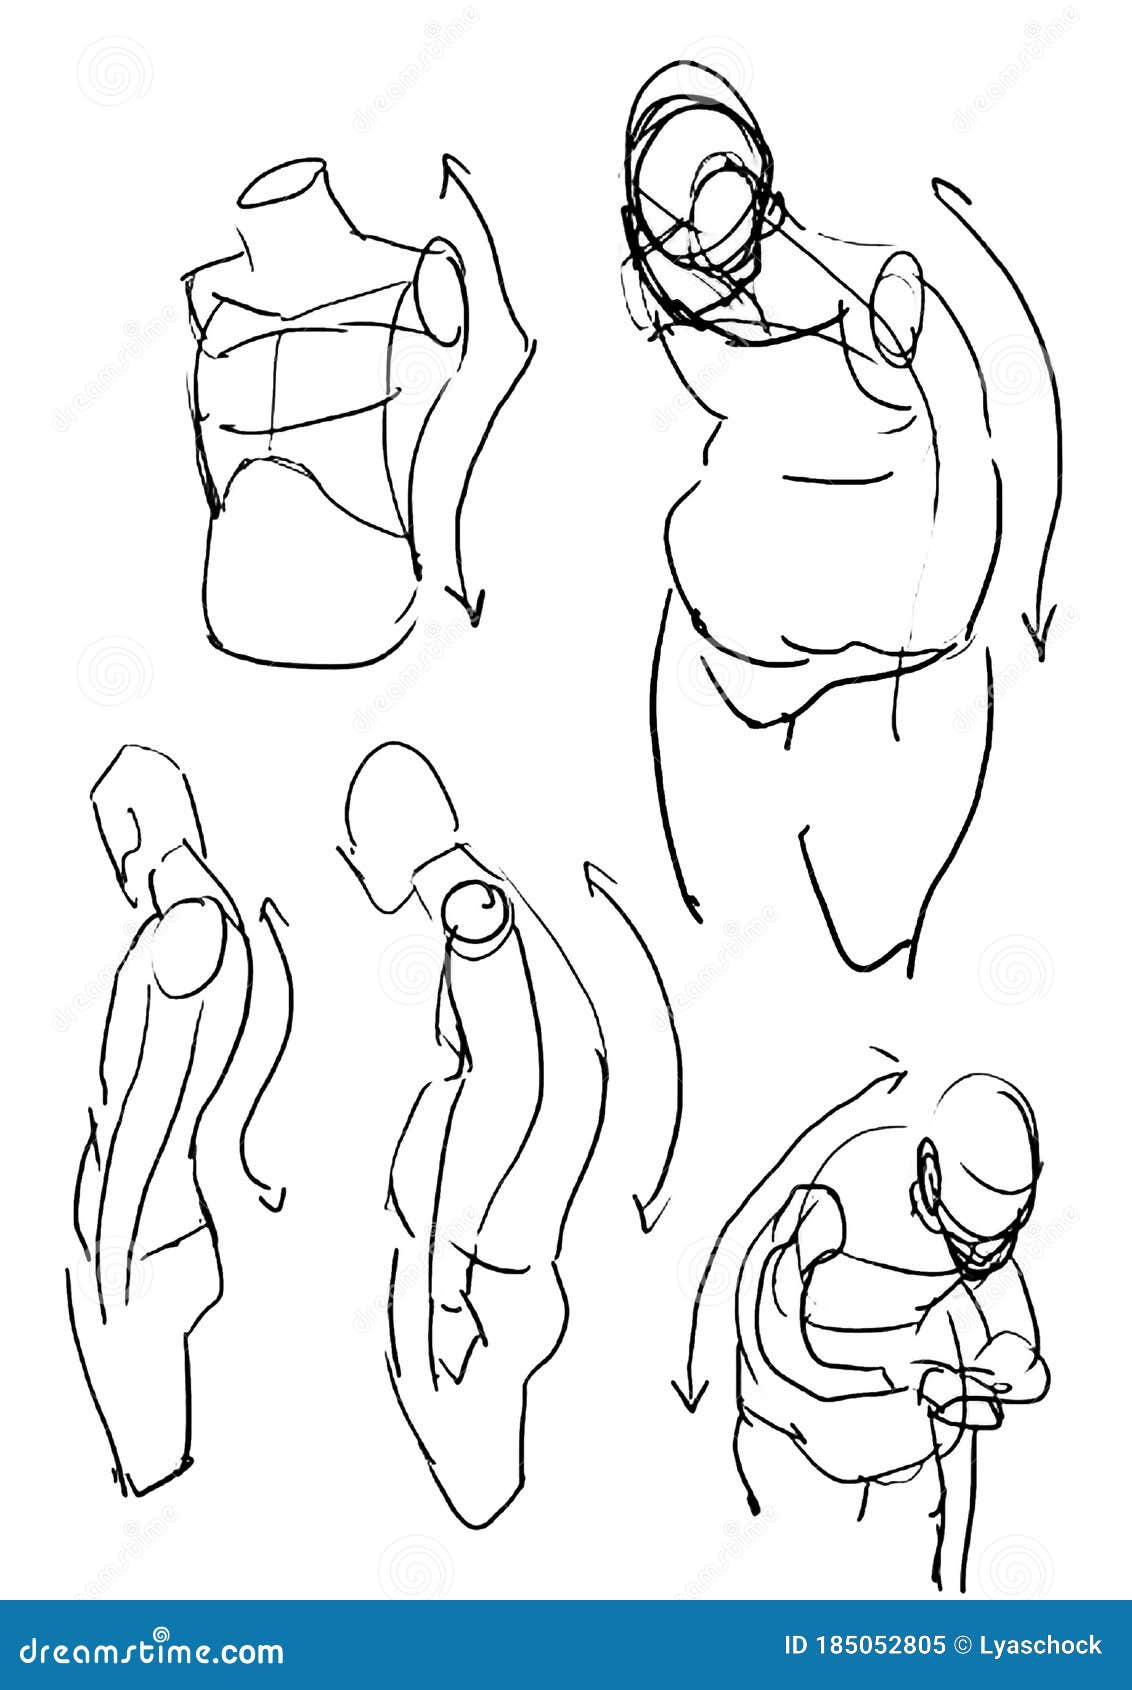 Train Your Brain: Powerful Gesture Drawing Exercise | Love life drawing